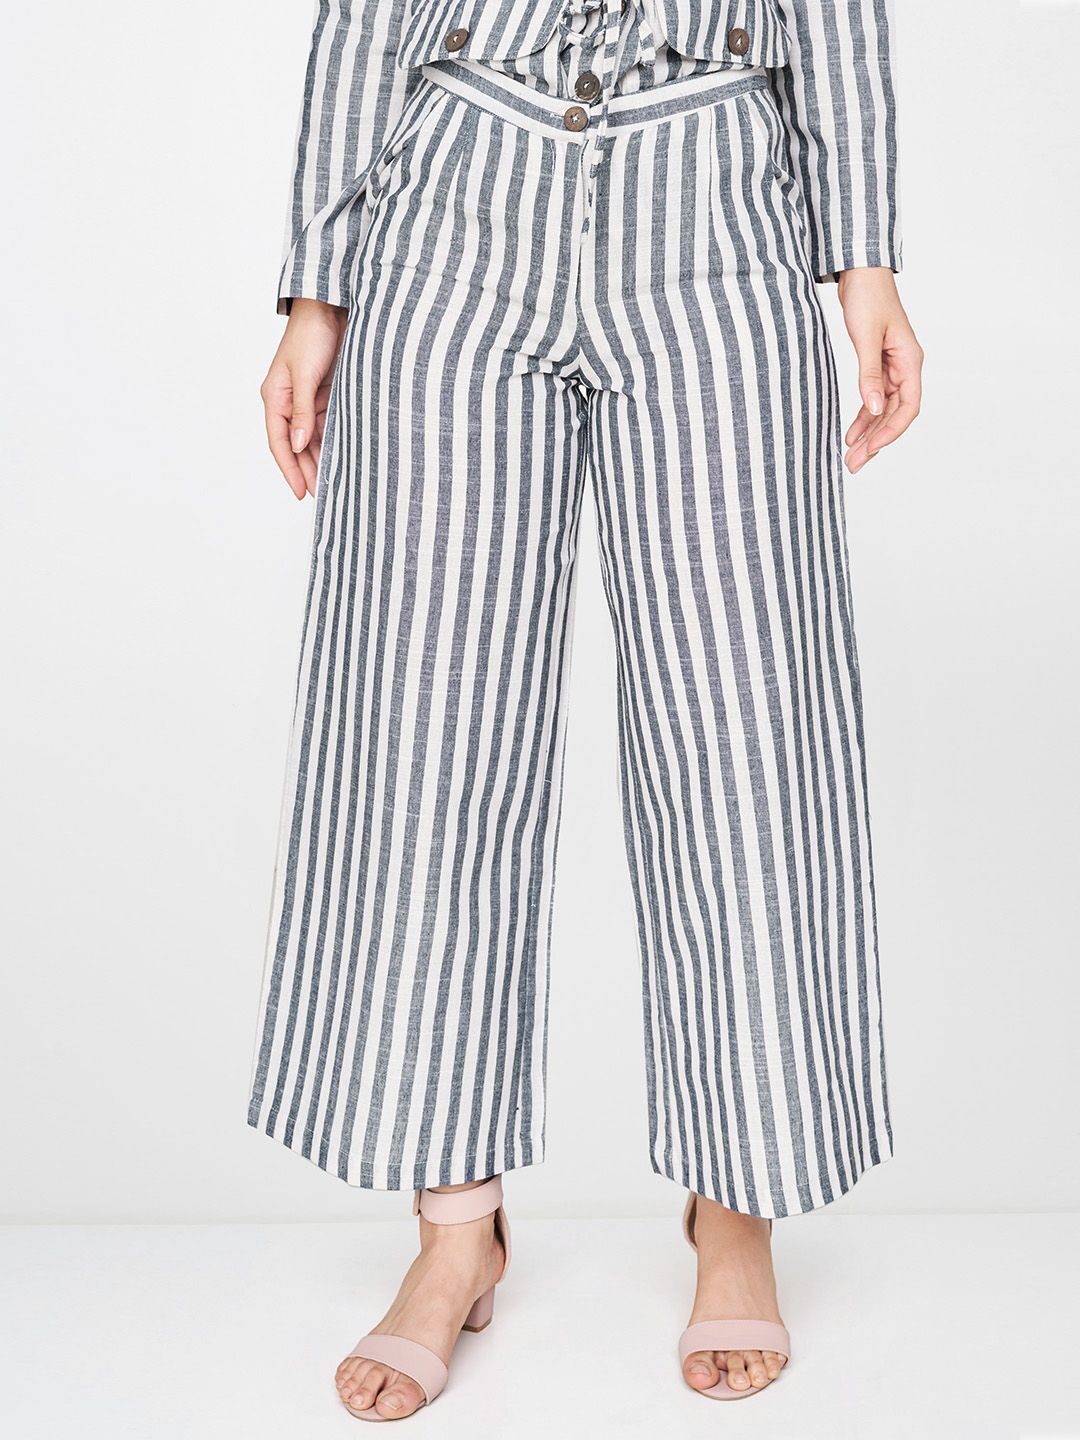 AND Women Navy Blue & White Regular Fit Striped Parallel Trousers Price in India